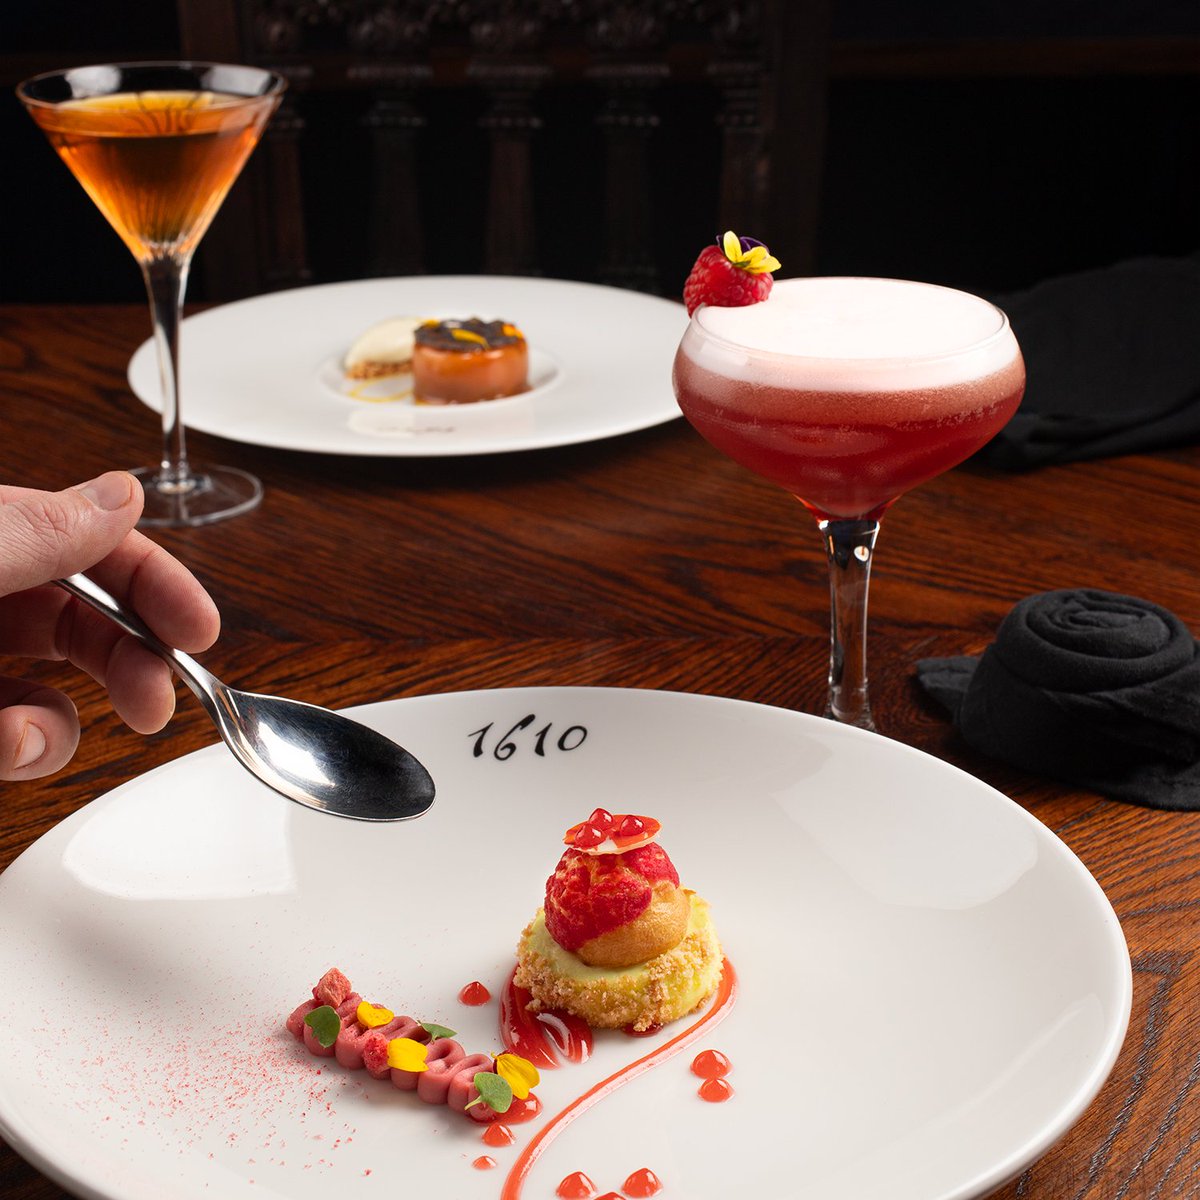 TGIF... You've earned it!  
Treat yourself to cocktails and decadent desserts at The Globe Inn, Dumfries. 
The perfect way to unwind after a long week.

Book you table at The Globe Inn -> bit.ly/3qe2r8v

#TGIF
#TreatYourself
#DessertTime
#RelaxAndUnwind
#WeekendVibes